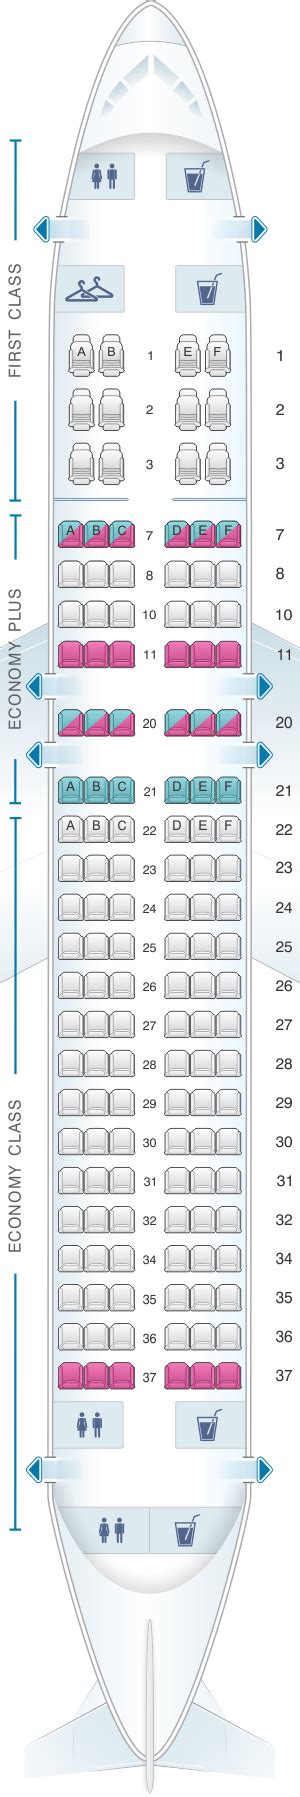 30 United A320 Seat Map Maps Database Source